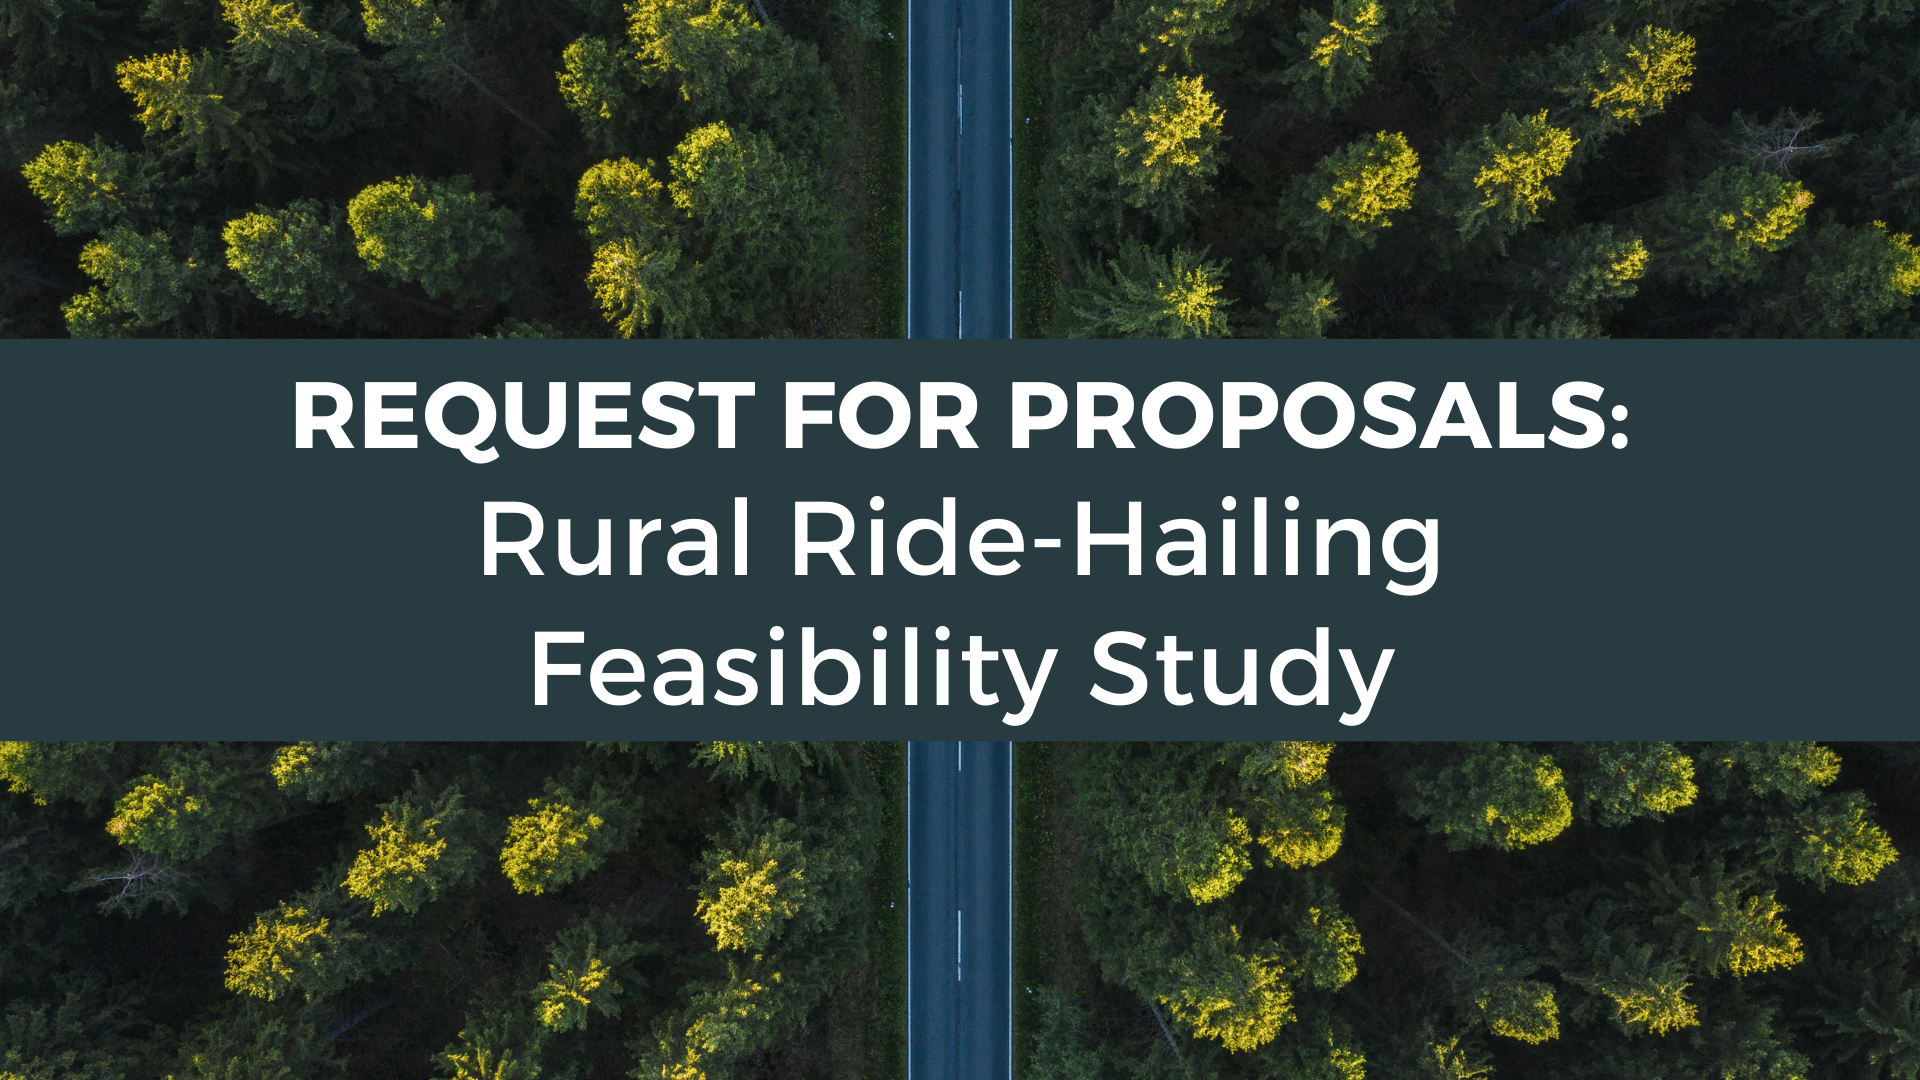 Arial photo of forest with a straight road running through the centre and text reads "Request for Proposals Rural Ride Hailing Feasibility Study"